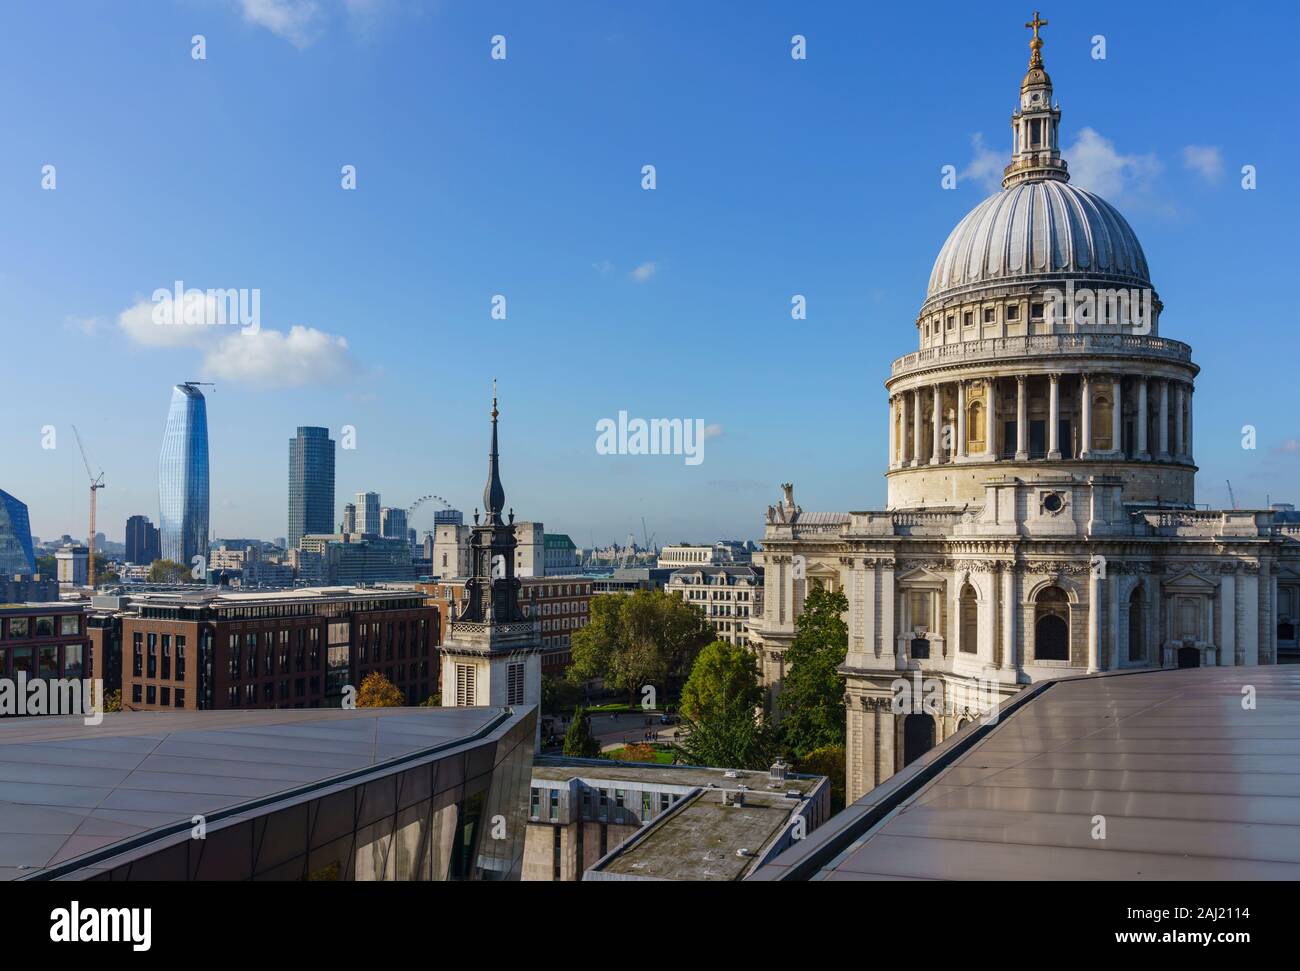 St. Paul's Cathedral and city skyline from One New Change, London, England, United Kingdom, Europe Stock Photo